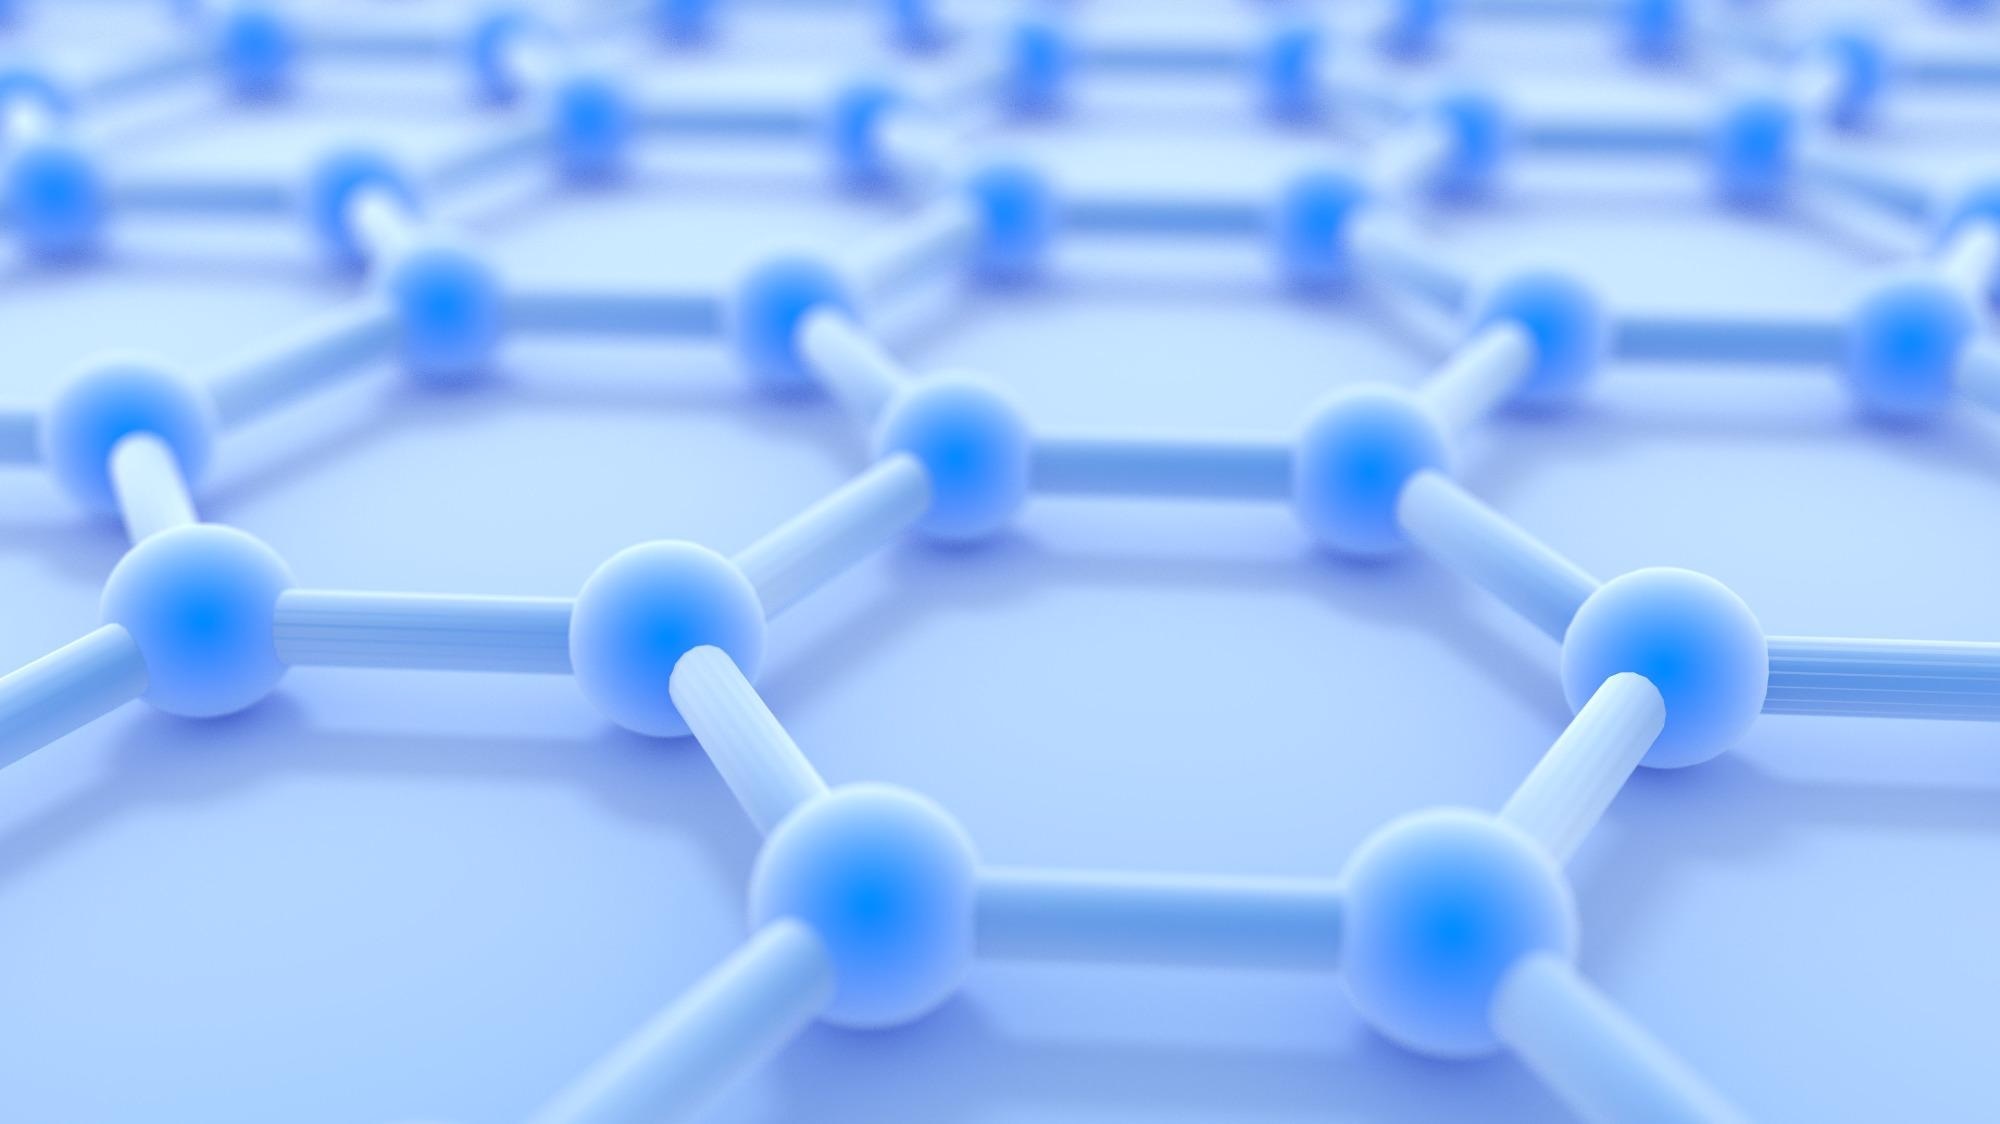 2D Doped Graphene Paves the Way for Next Generation Optoelectronics.